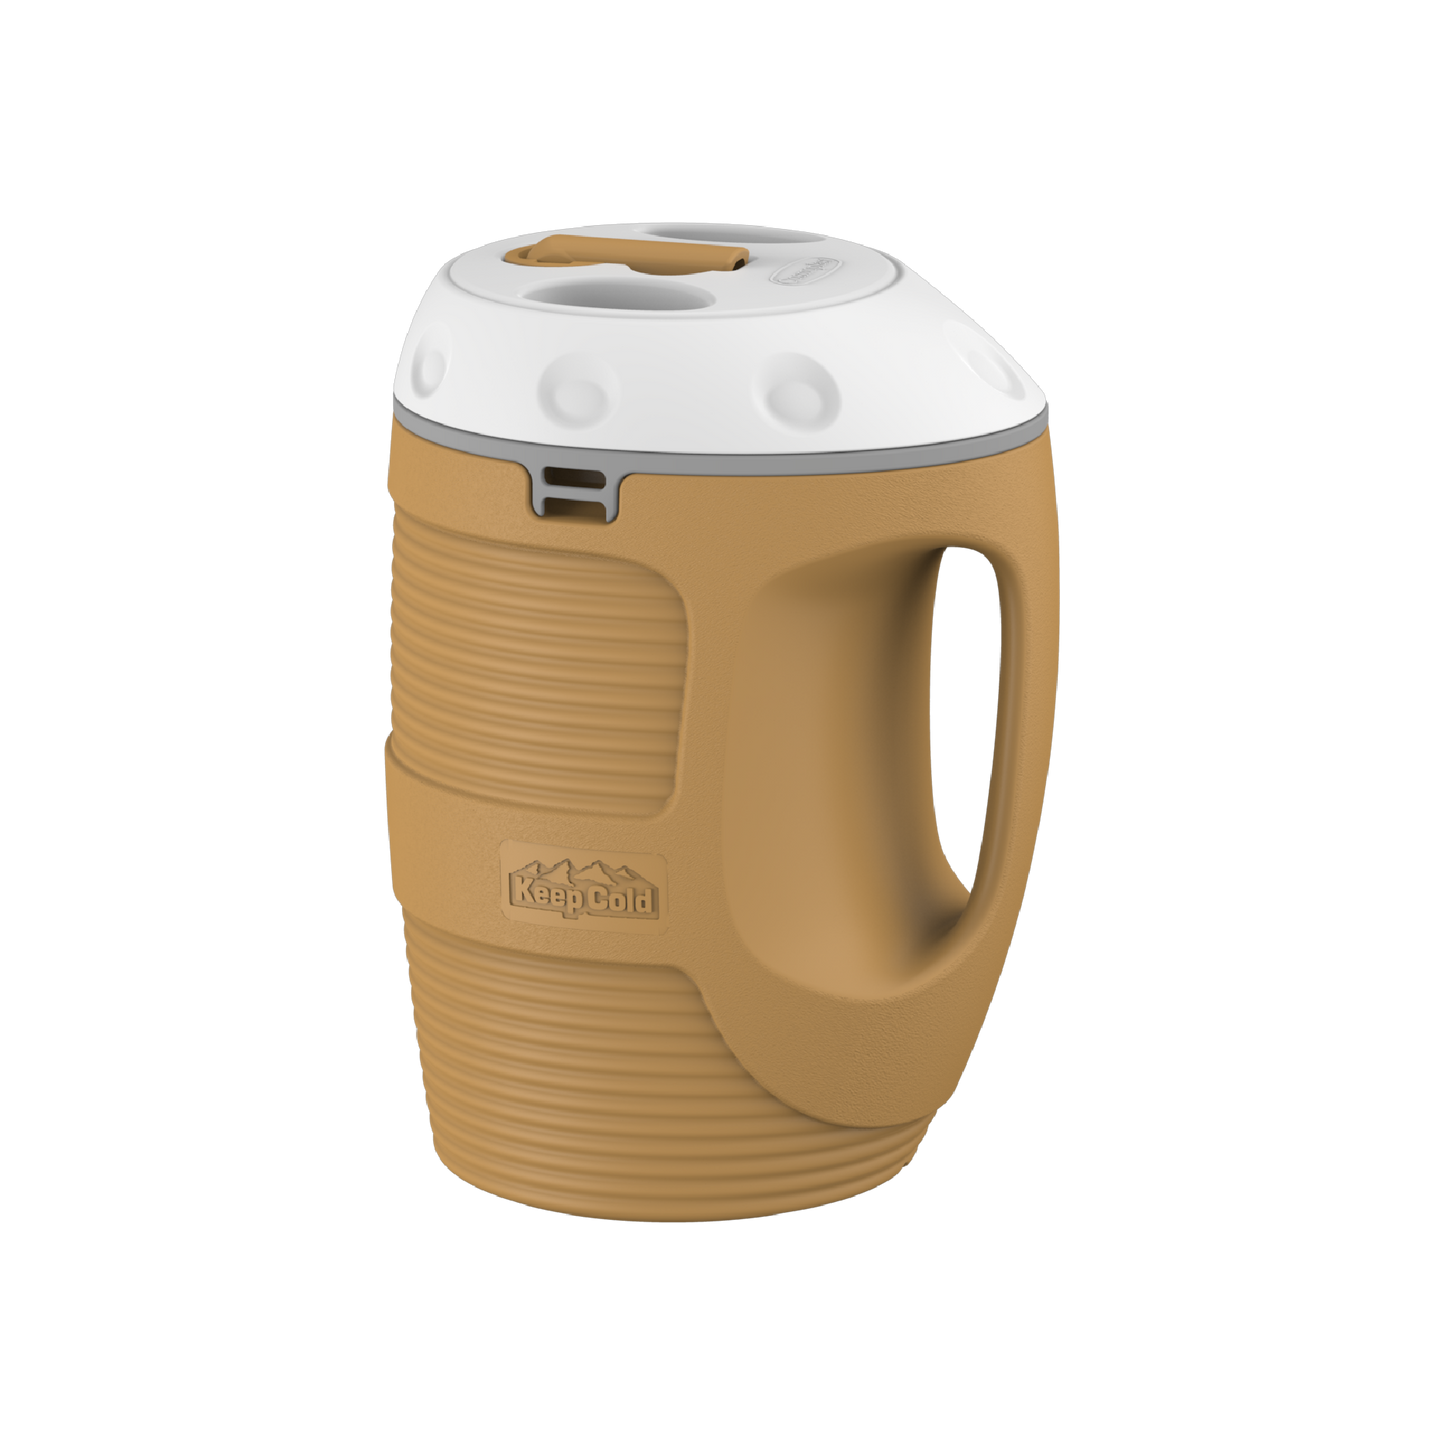 1.8L KeepCold Thermal Jug with Strap - Cosmoplast Bahrain